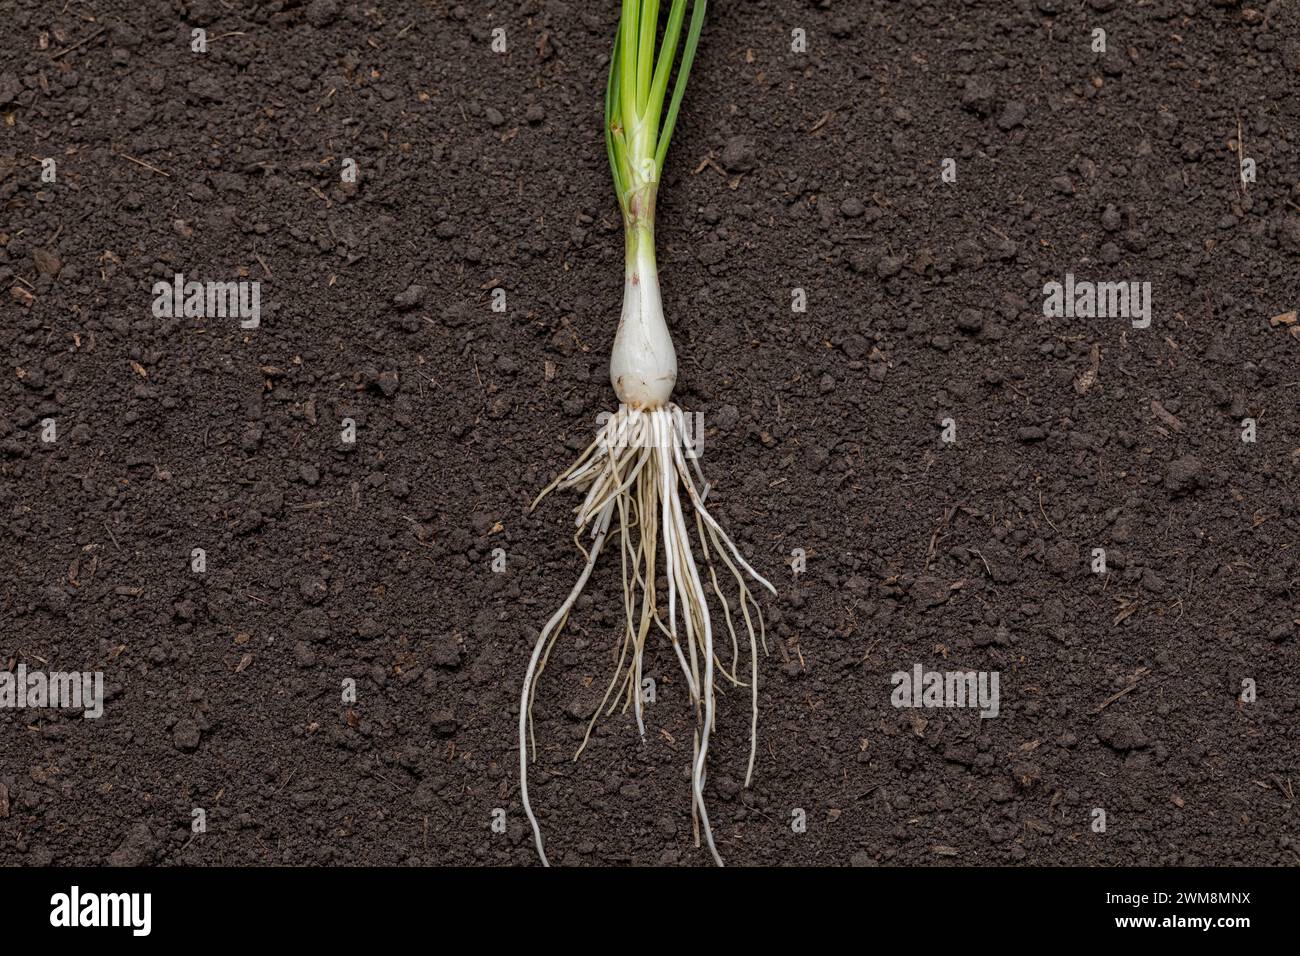 Onion transplant showing root system, ready for spring planting. Gardening, organic produce and home garden concept. Stock Photo